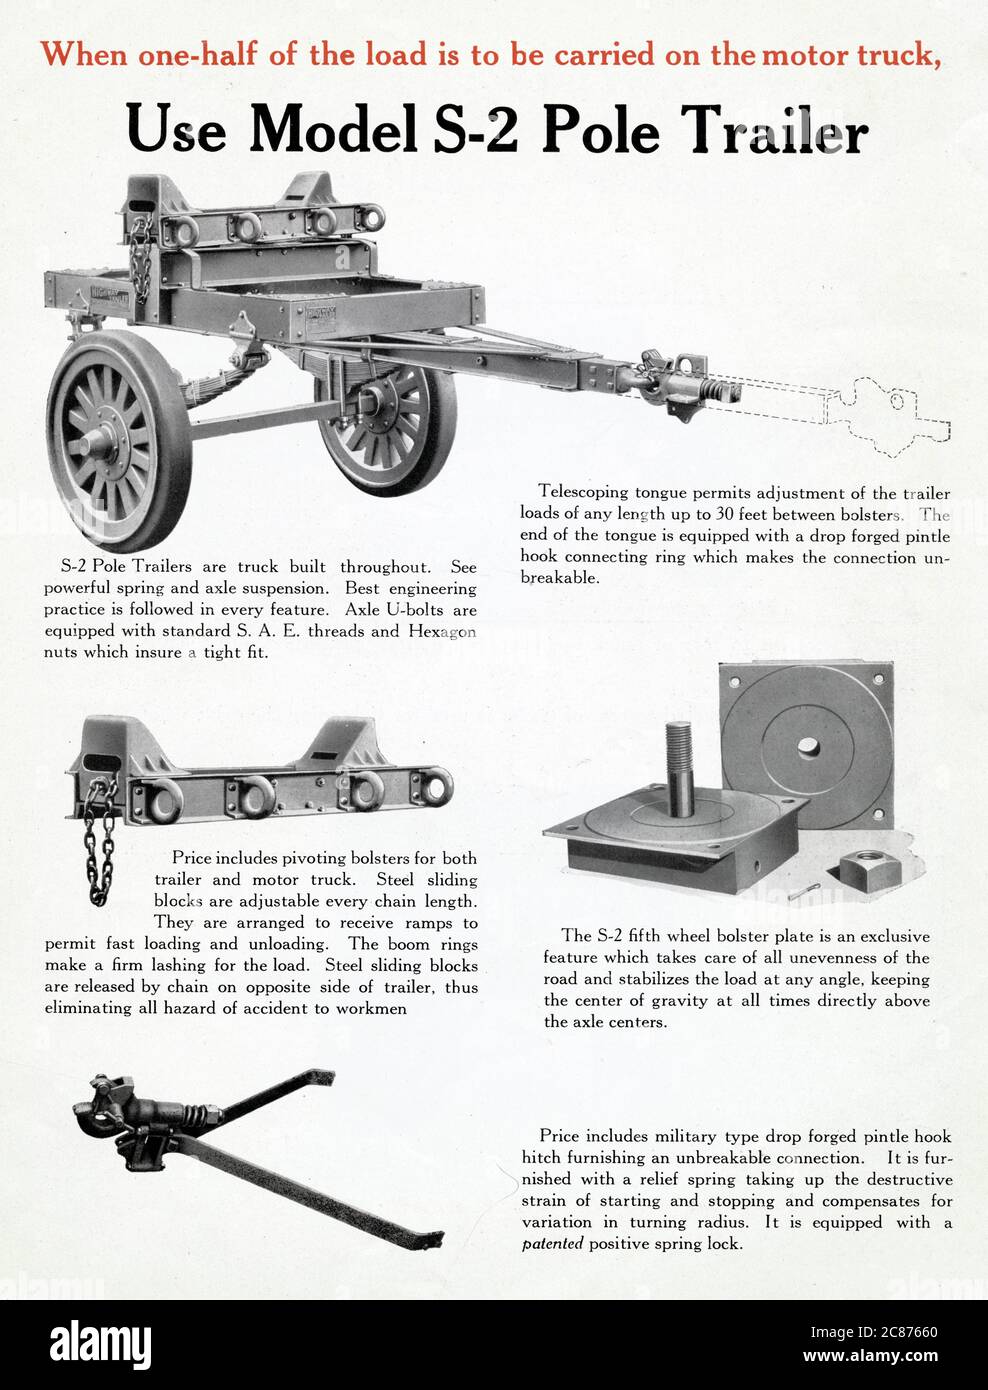 Model S-2 Pole Trailer and accessories -- when one half of the load is to  be carried on the motor truck. Date: early 1920s Stock Photo - Alamy